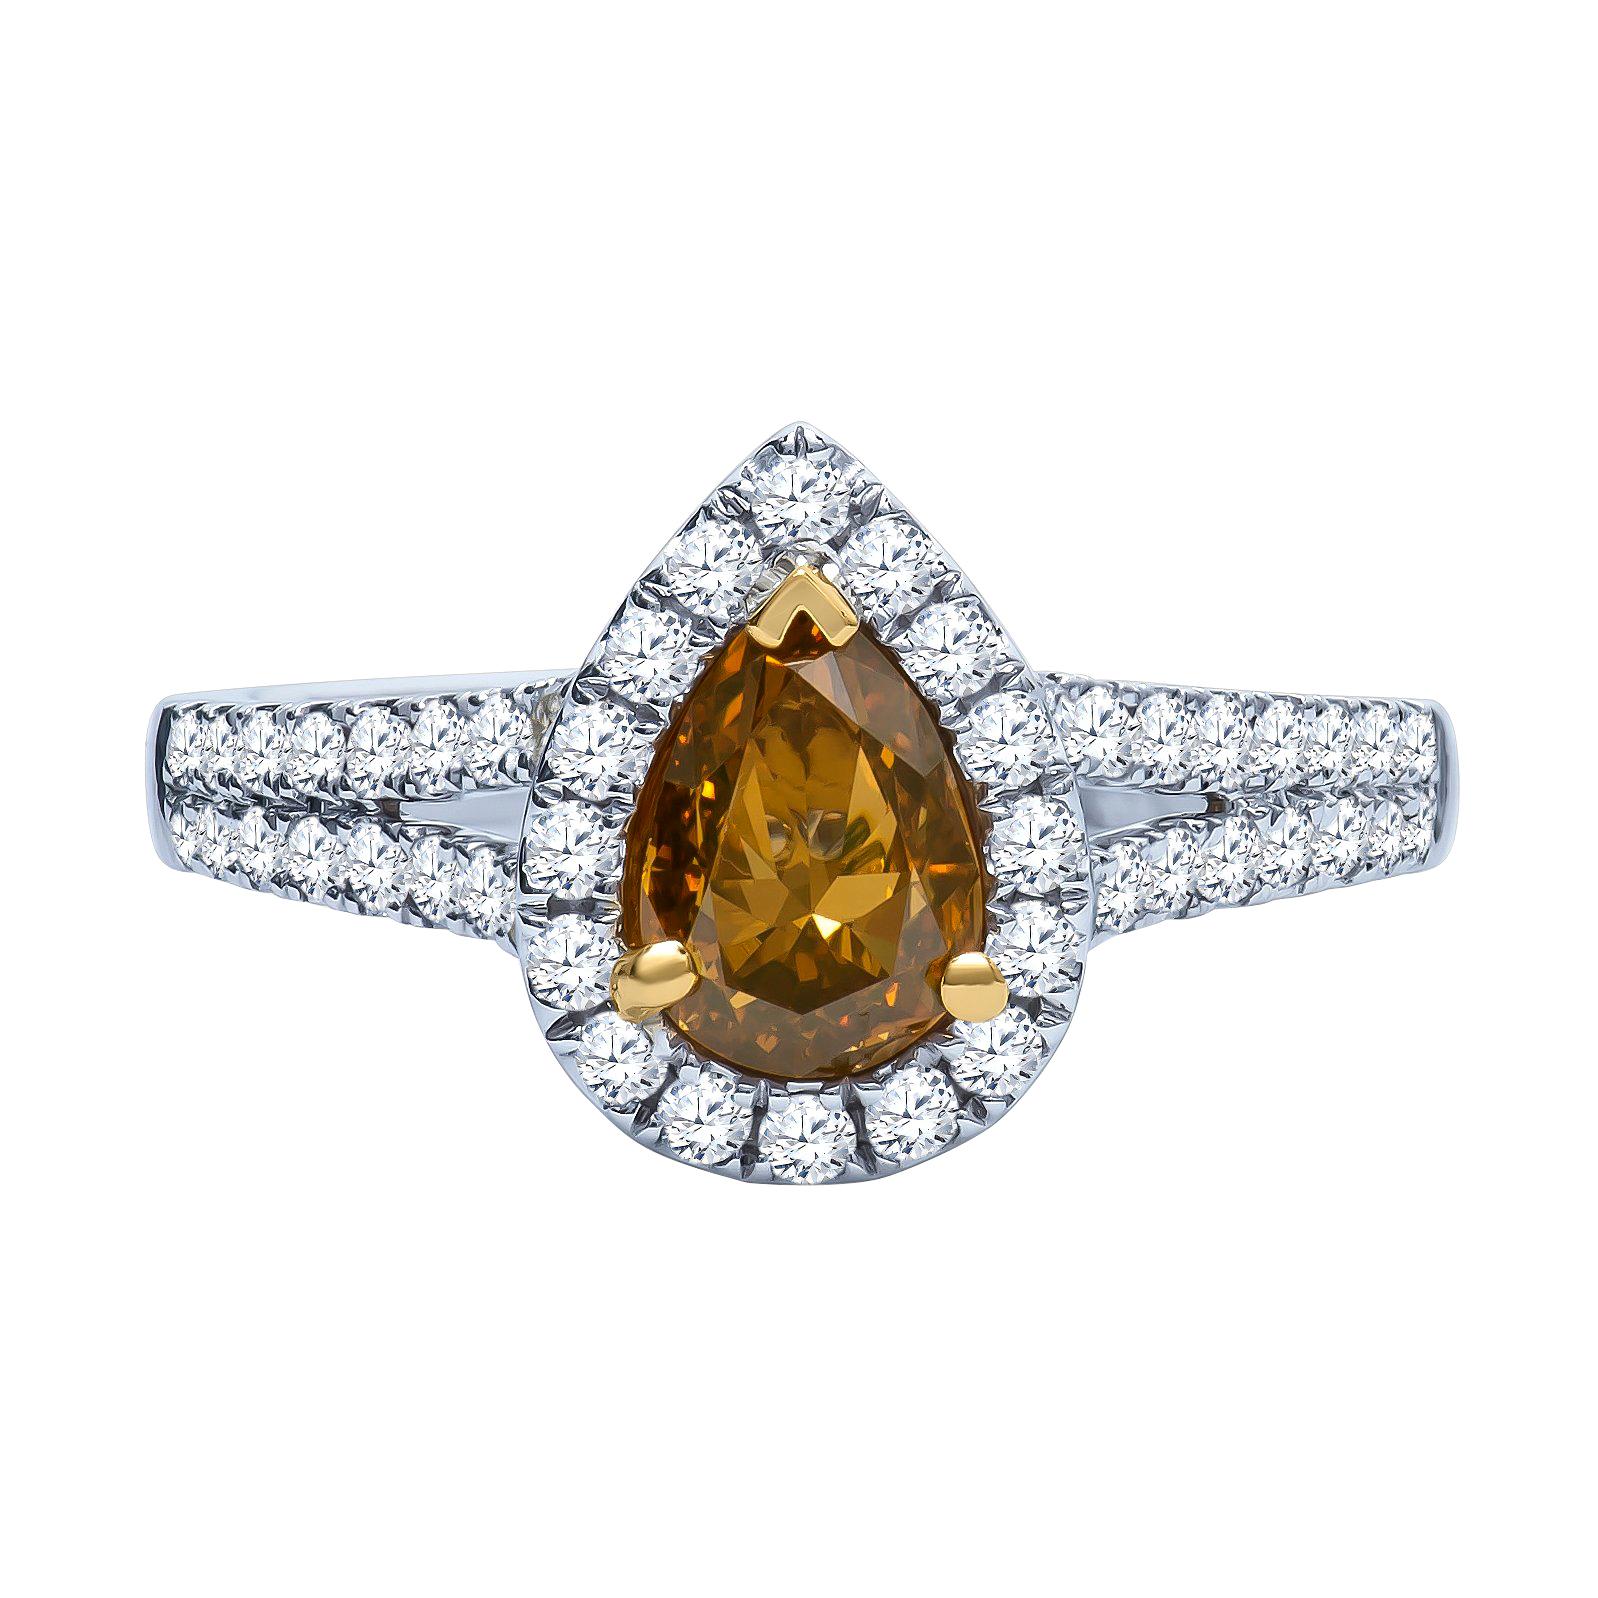 1.00 Carat Pear Shape Fancy Brown, Yellow Color Center Diamond Engagement Ring